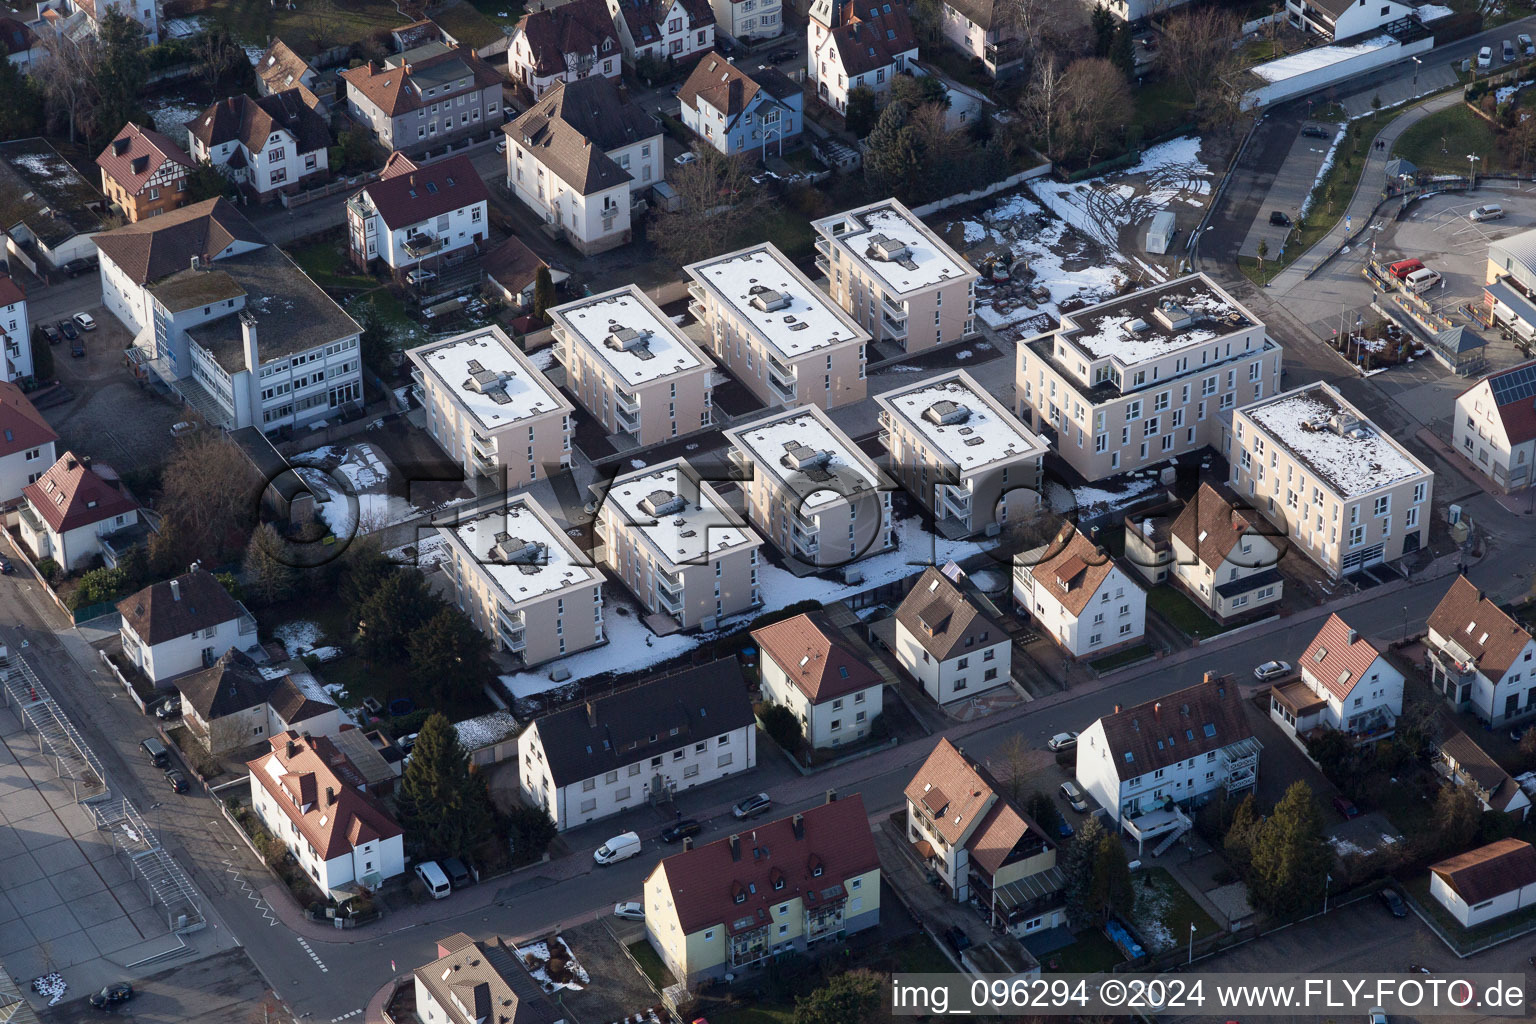 Construction site for City Quarters Building 'Im Stadtkern' in Kandel in the state Rhineland-Palatinate, Germany from a drone